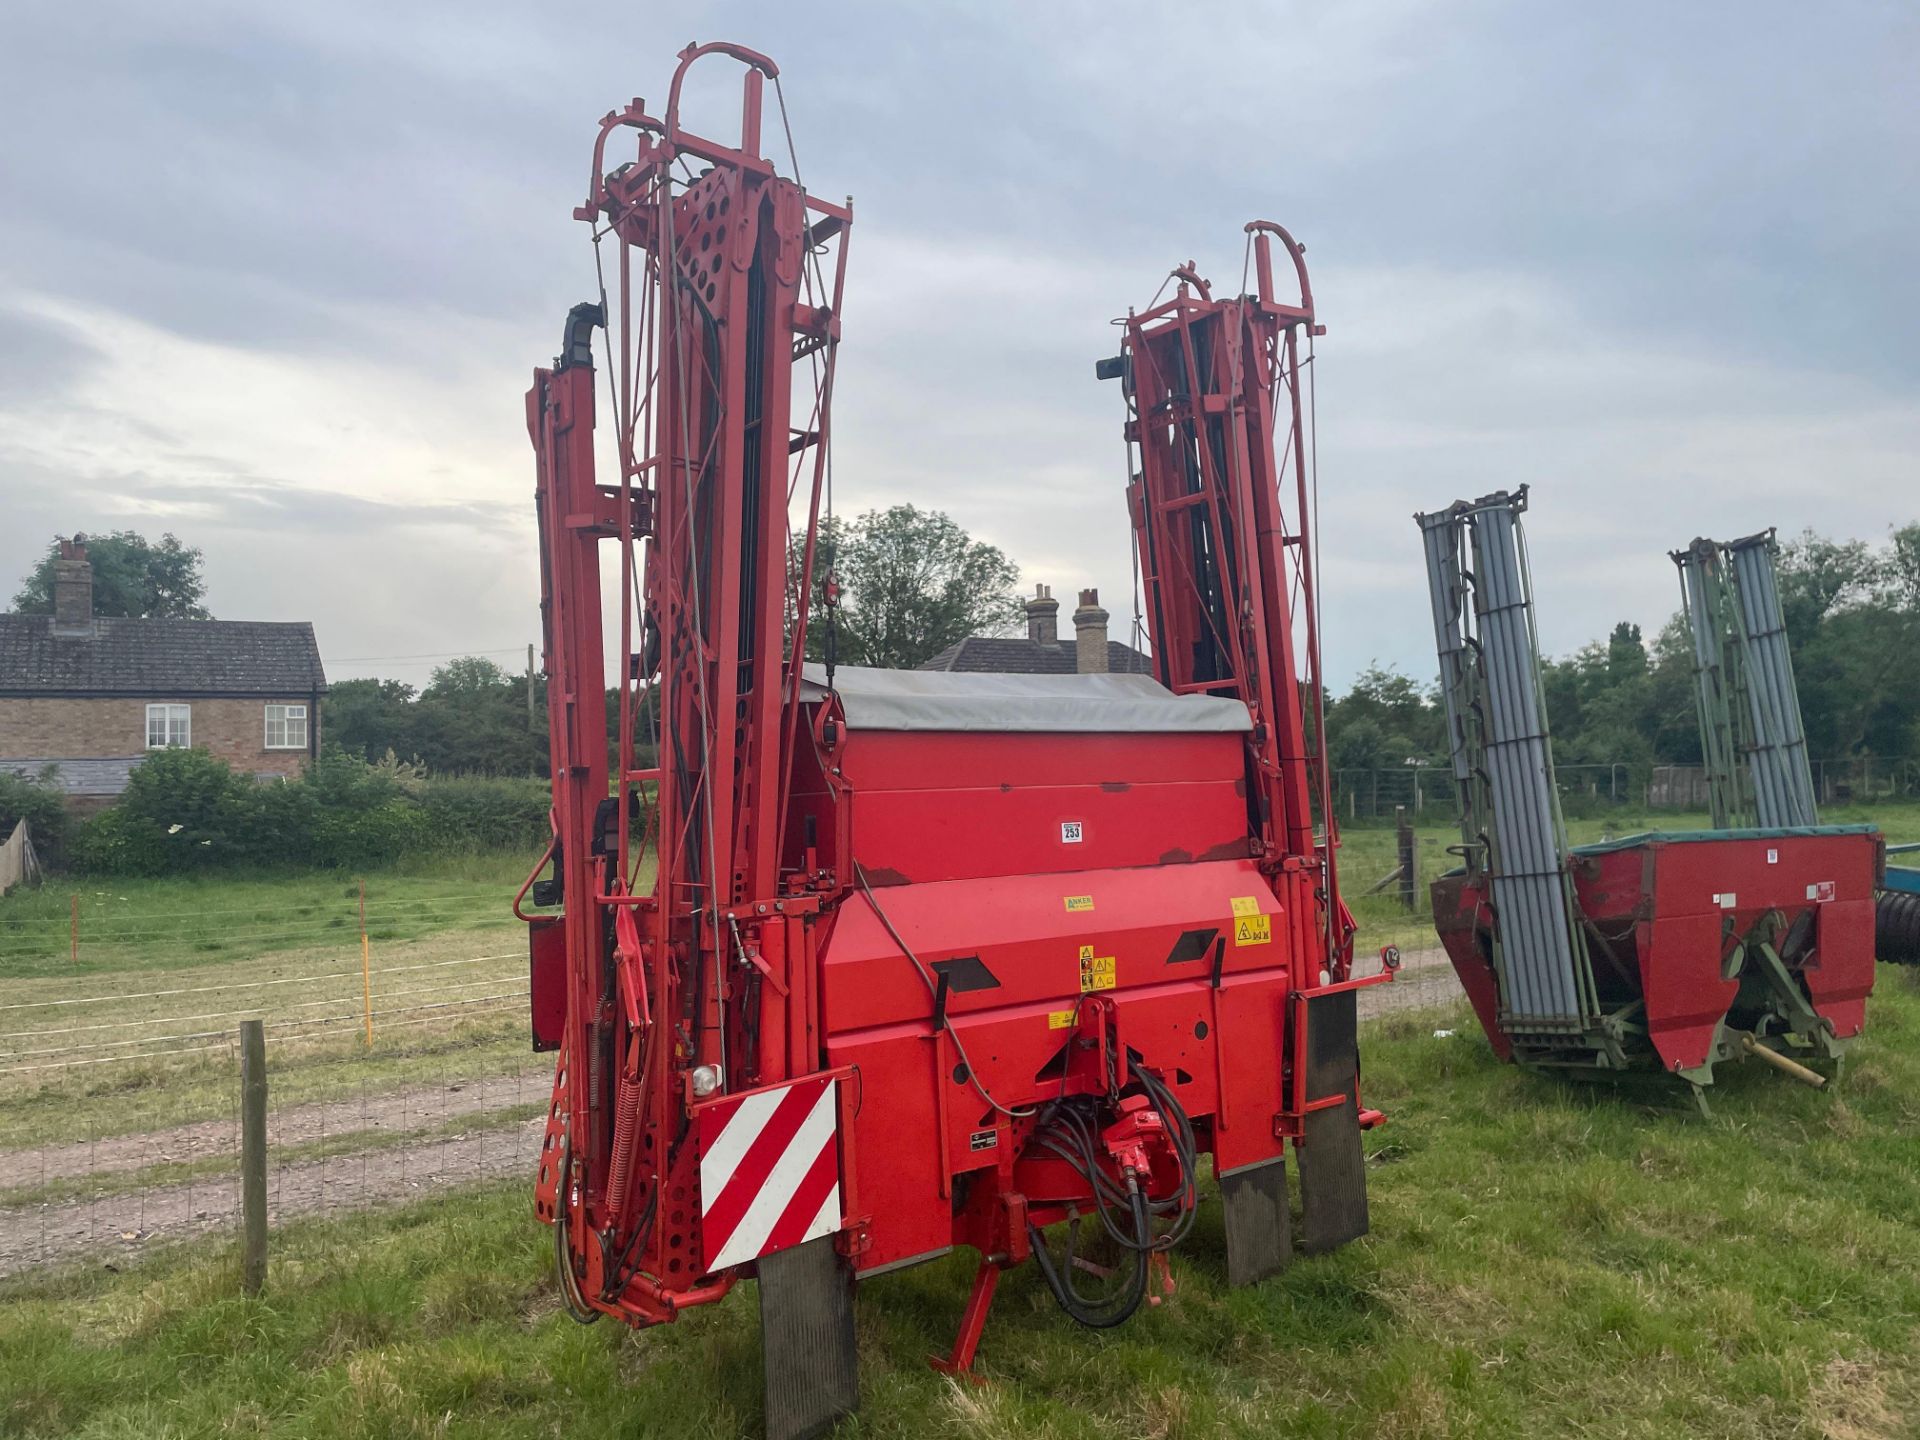 2003 Kuhn Aero 2224 24m boom spreader with Avadex rollers. Serial No: 15255 NB: Manual and Control i - Image 2 of 3